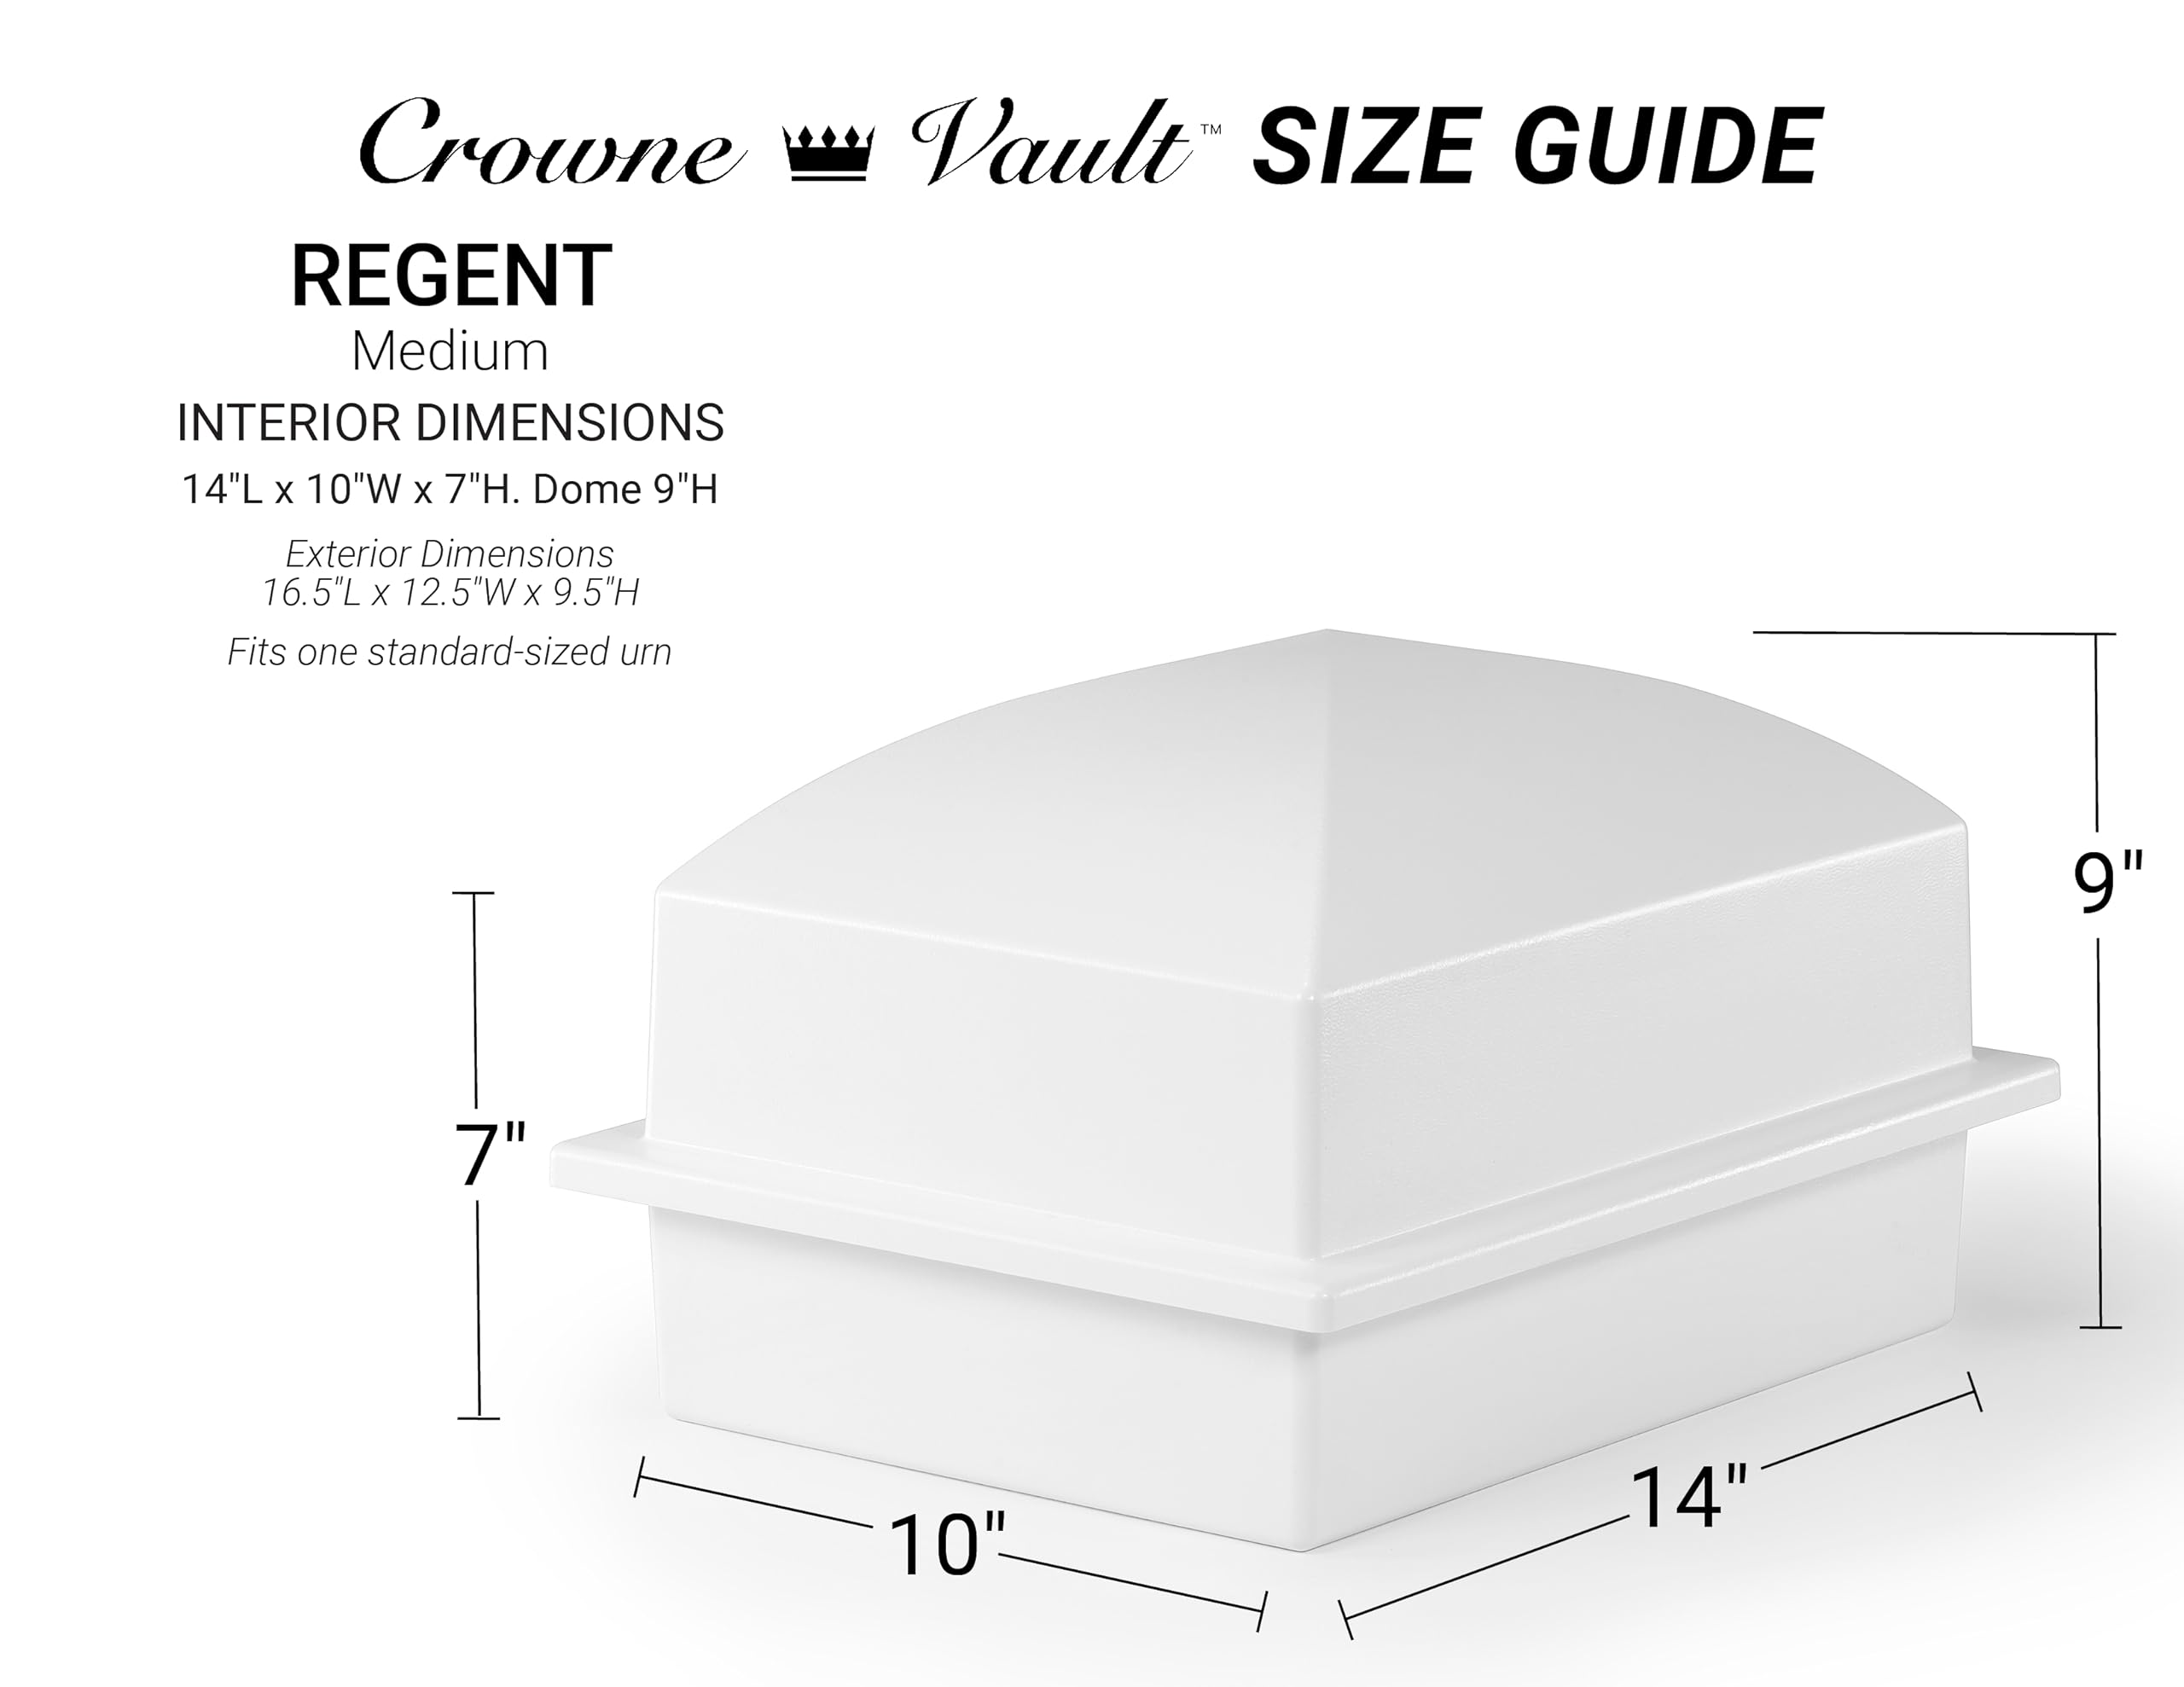 Crowne Vault Custom Engraved Urn Vault for Underground Burial | Fortified Container to Hold Adult Human Ashes and Cremation Urns for Cemetery and Ground Burials | Made in The USA (White, Regent)